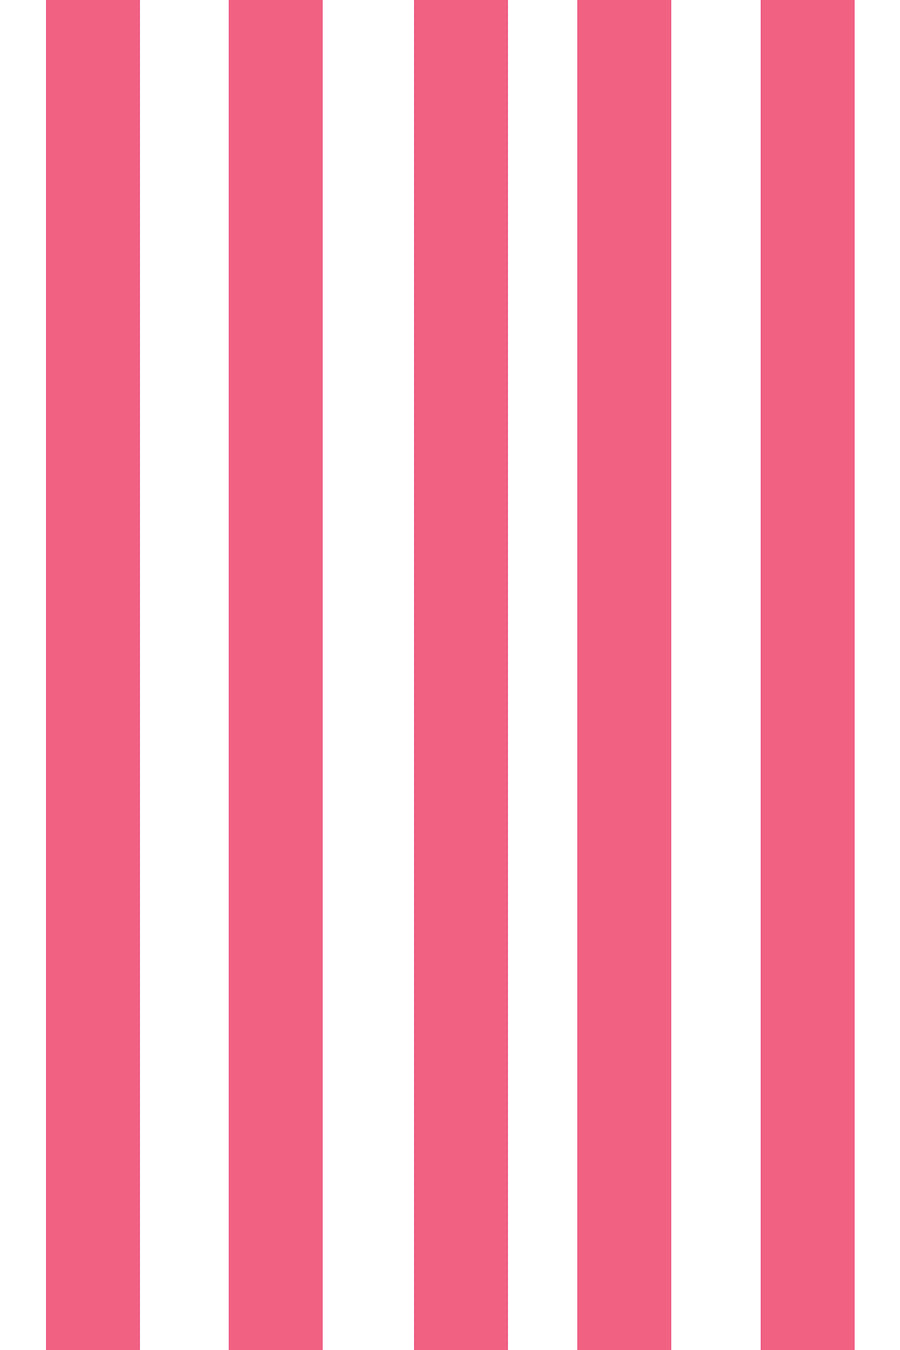 Woolf With Me Fitted Crib Sheet Stripes color_french-rose